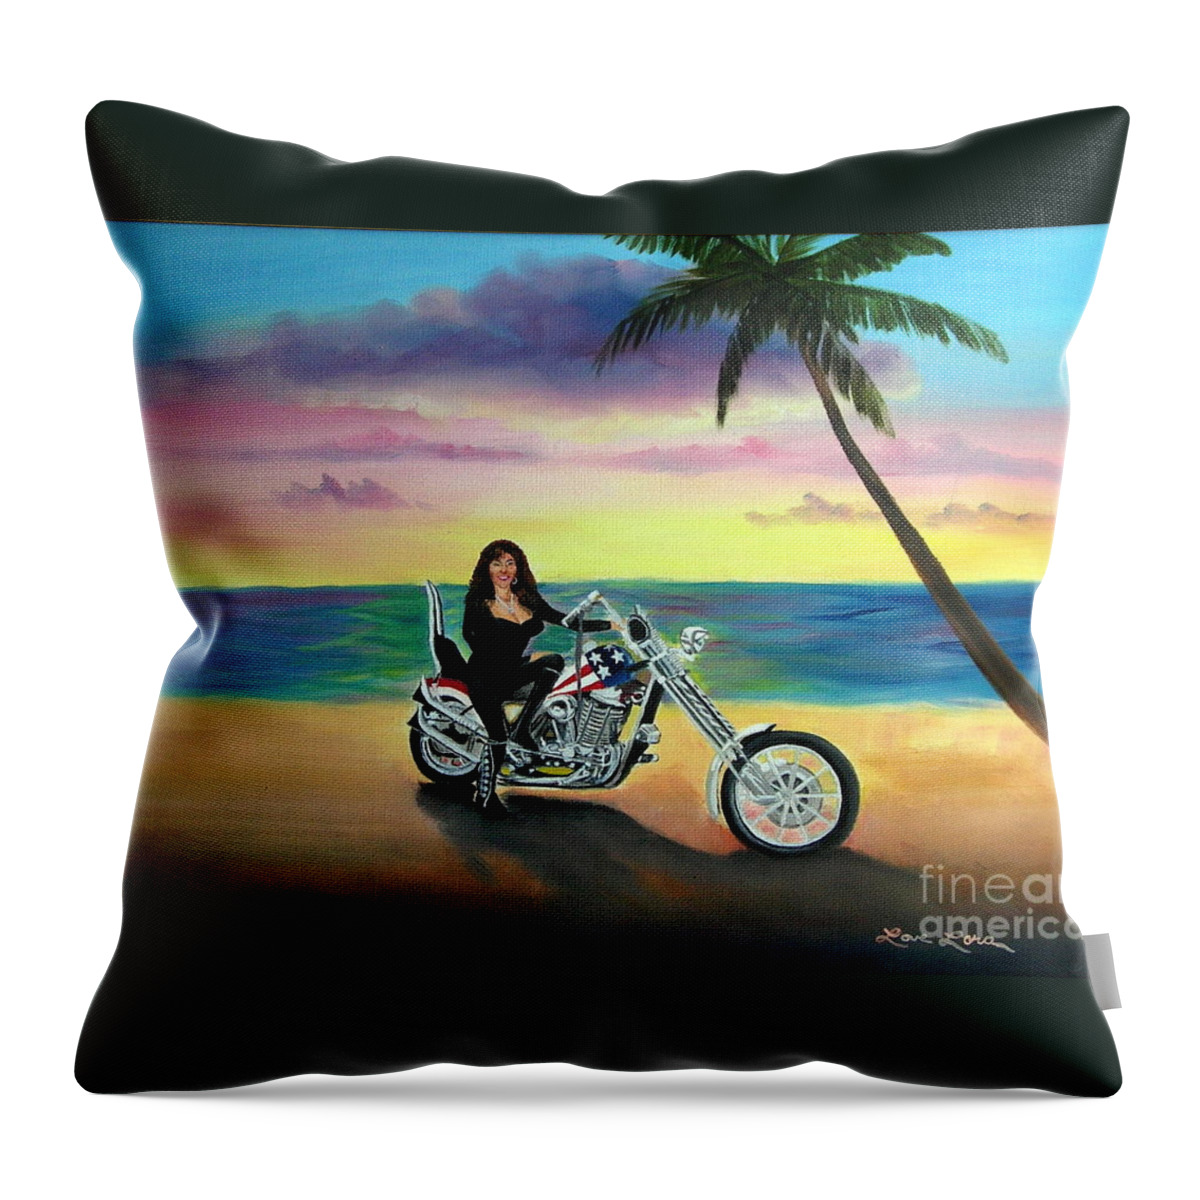 Harley Davidson Throw Pillow featuring the painting Captain America by Lora Duguay